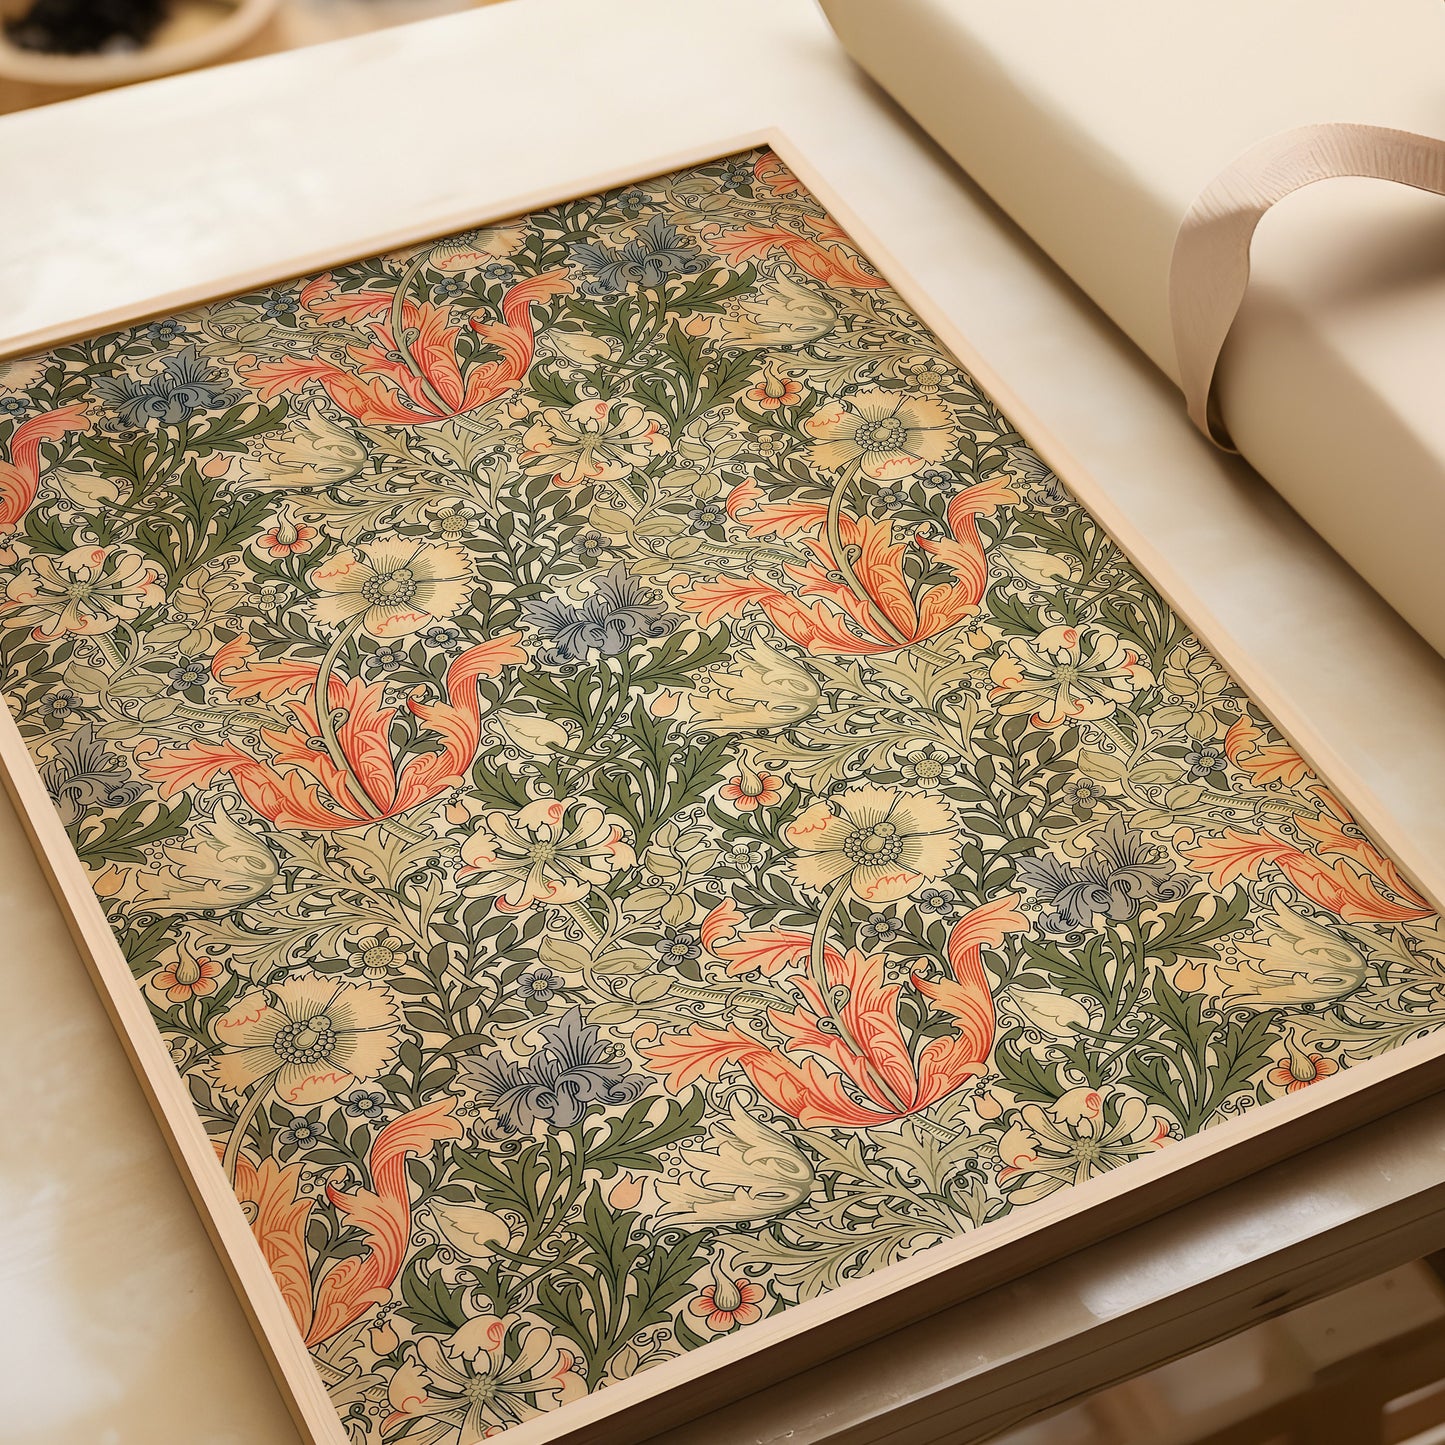 William Morris - Compton | Vintage Botanical Art by John Henry Dearle for the William Morris Gallery (available framed or unframed)